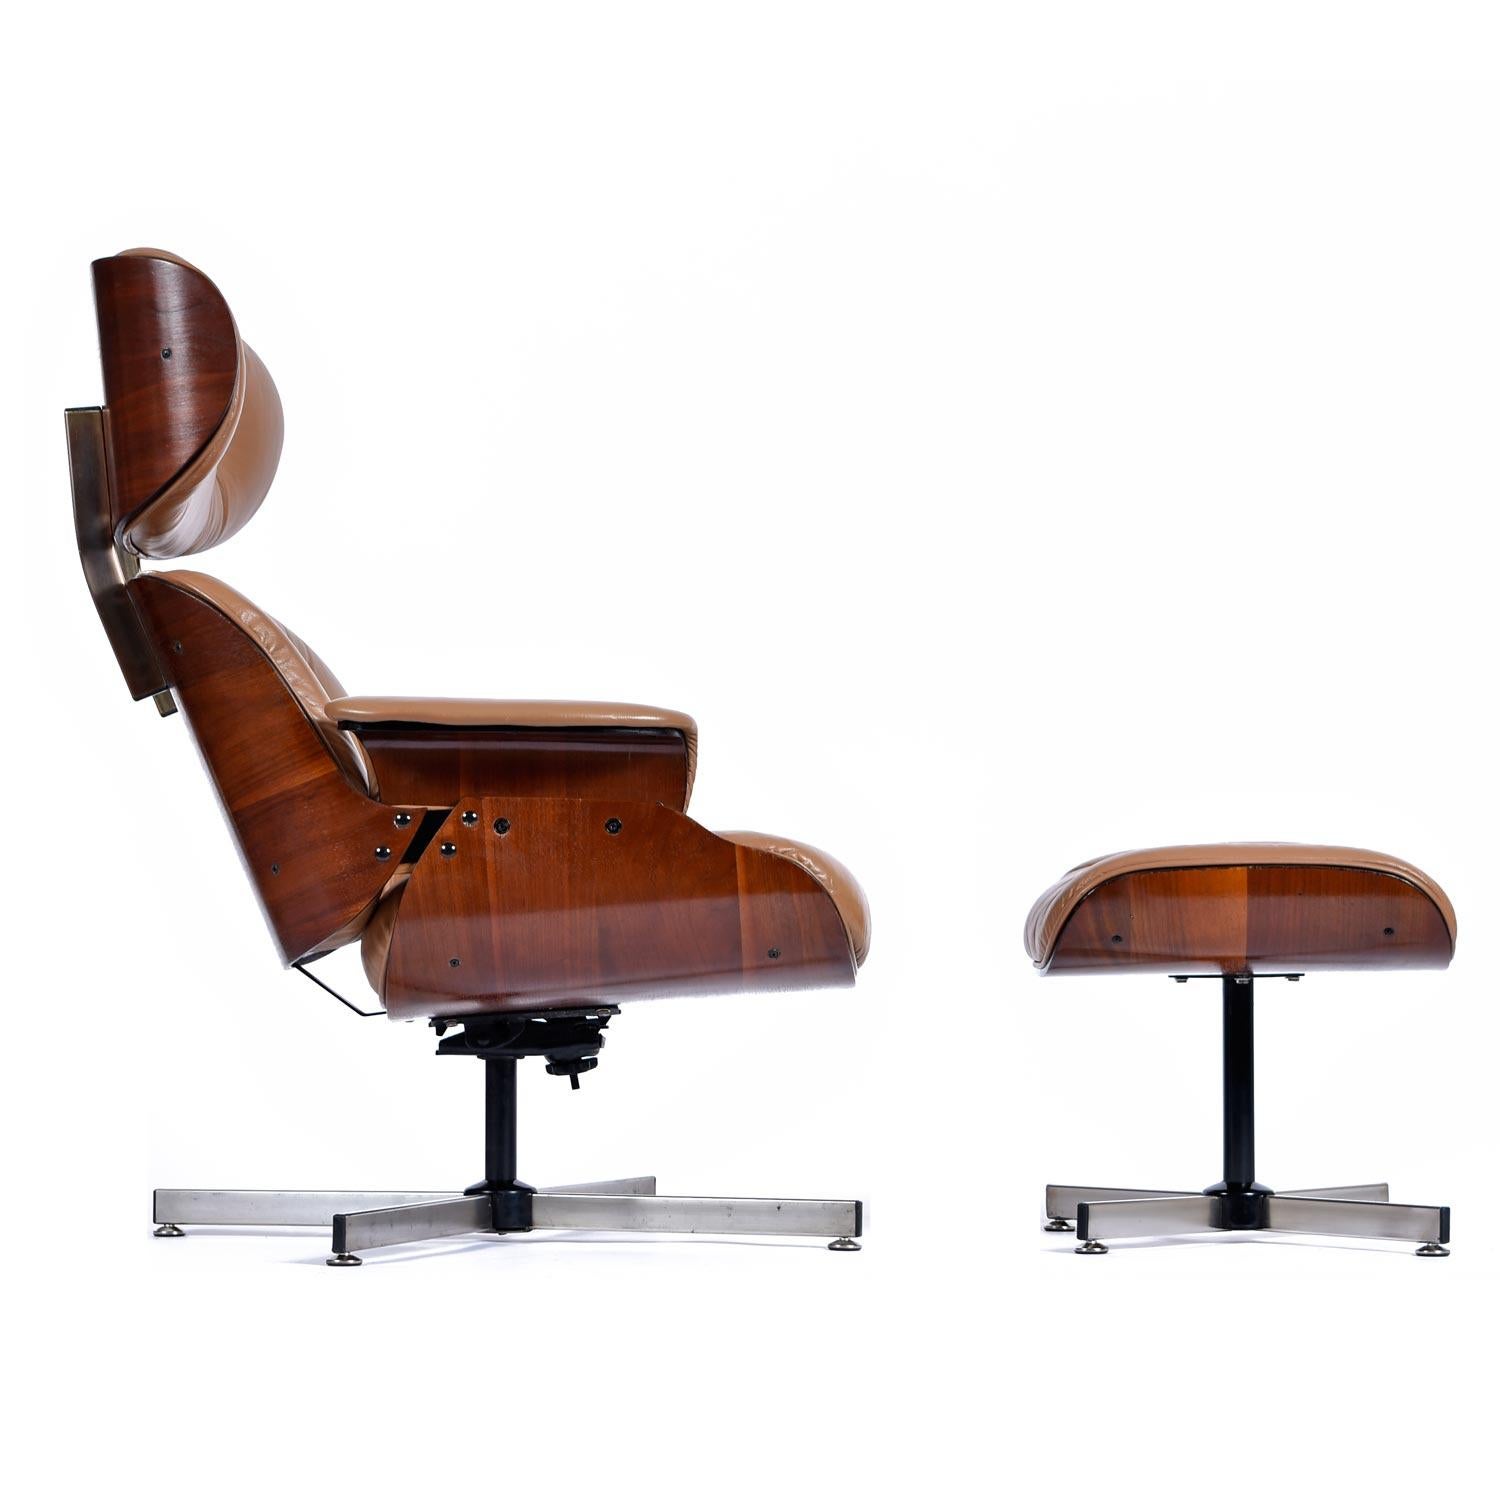 Beautifully restored Mid-Century Modern swivel lounge chair and matching ottoman by Plycraft. The original tag is missing, but it's definitely Plycraft. Gorgeous, tufted light-caramel faux leather with bentwood walnut wood frame. The aluminum base